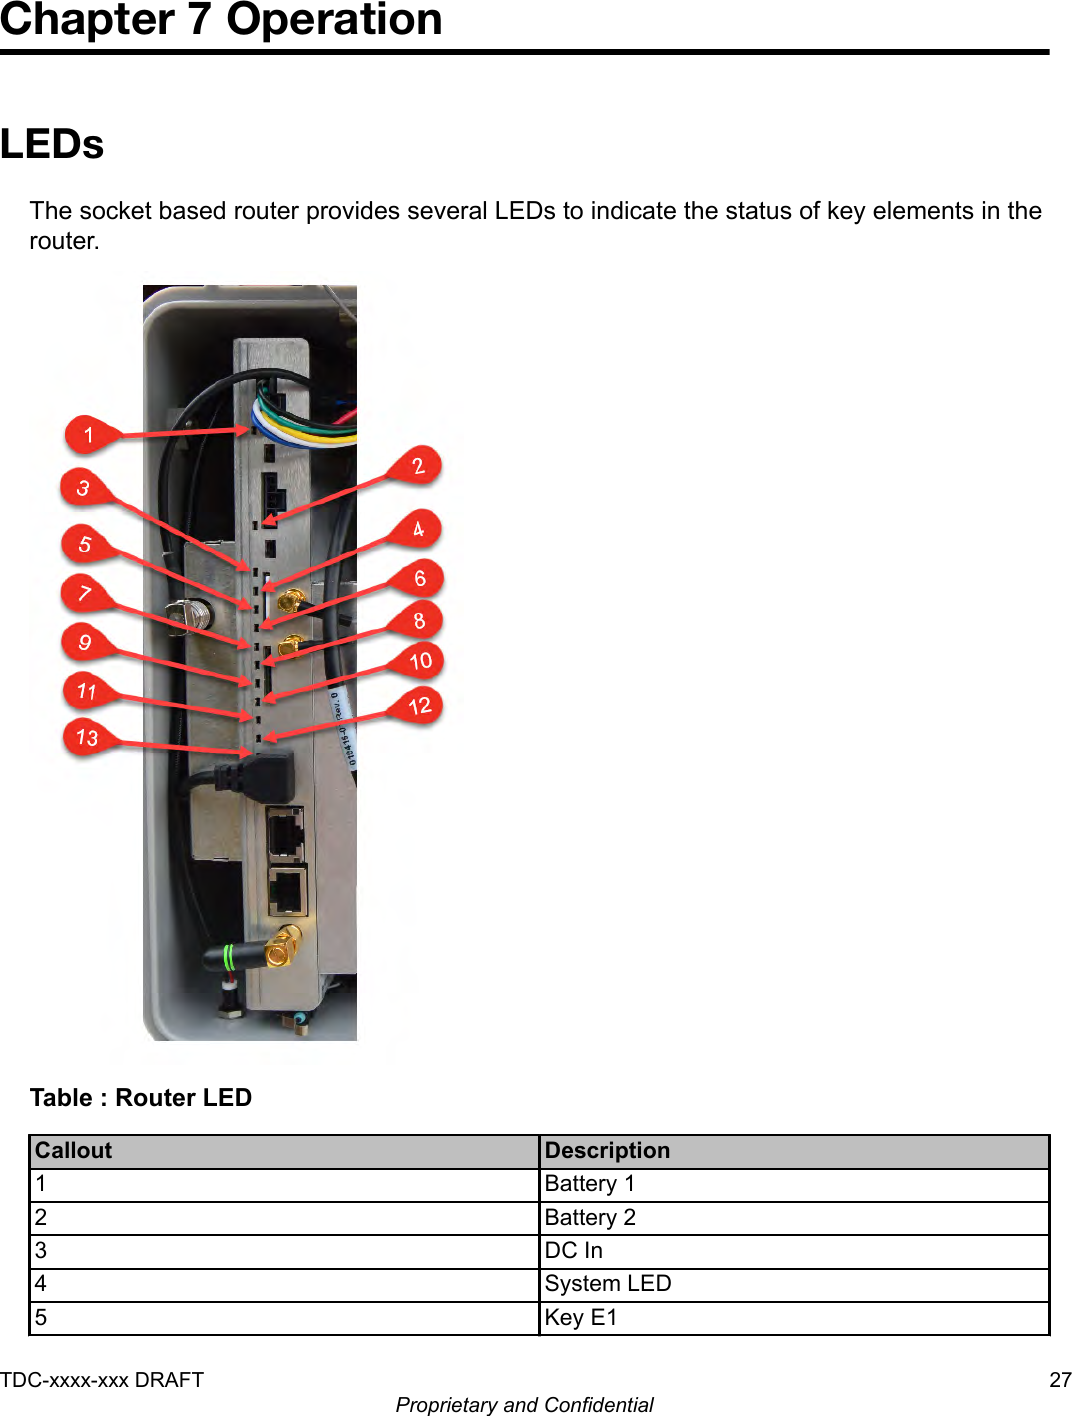 Chapter 7 OperationLEDsThe socket based router provides several LEDs to indicate the status of key elements in therouter.Table : Router LEDCallout Description1 Battery 12 Battery 23 DC In4 System LED5 Key E1TDC-xxxx-xxx DRAFT 27Proprietary and Confidential